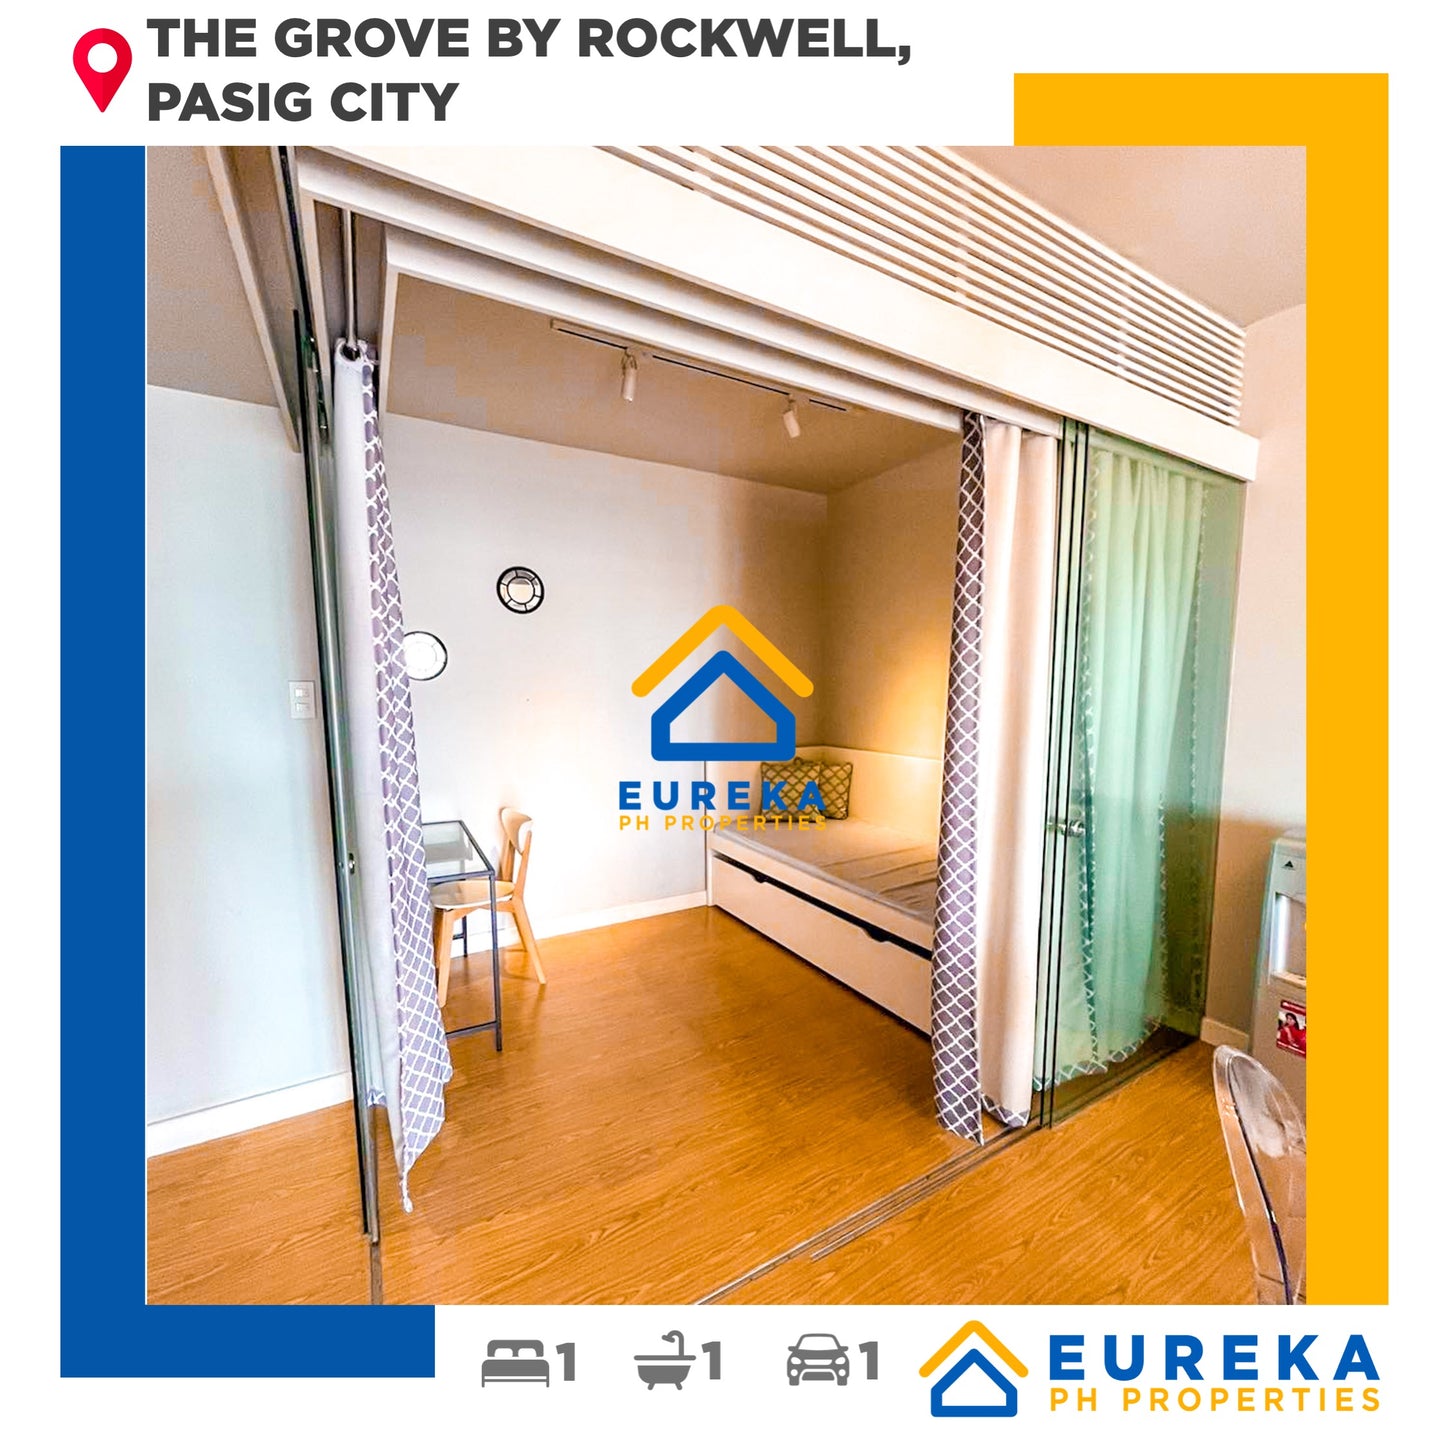 Fully furnished 68 sqm 1BR Flexi w/parking at Grove Rockwell, Pasig City.